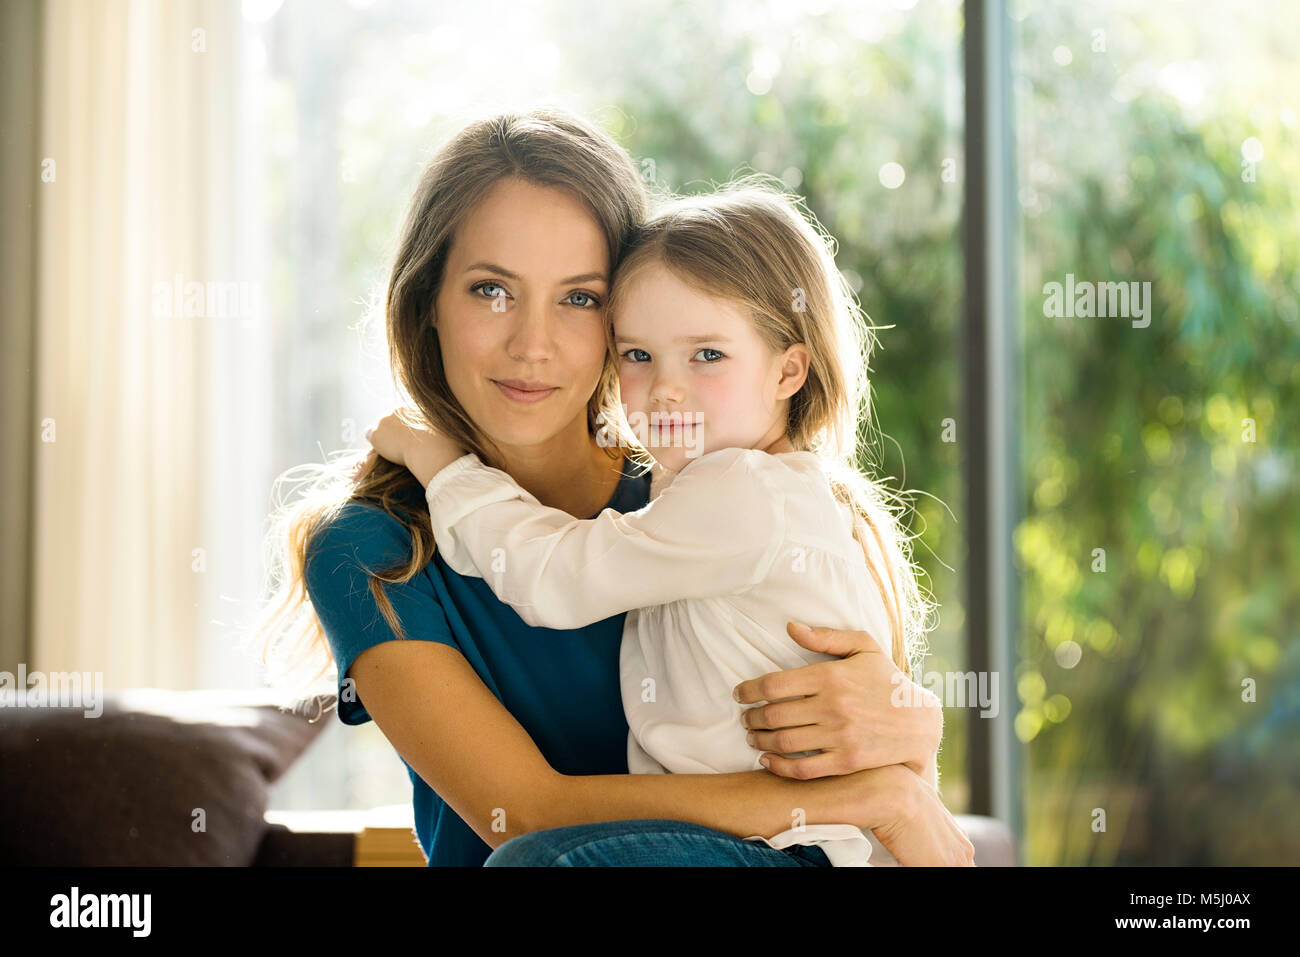 Portrait of smiling mother holding her daughter at home Stock Photo